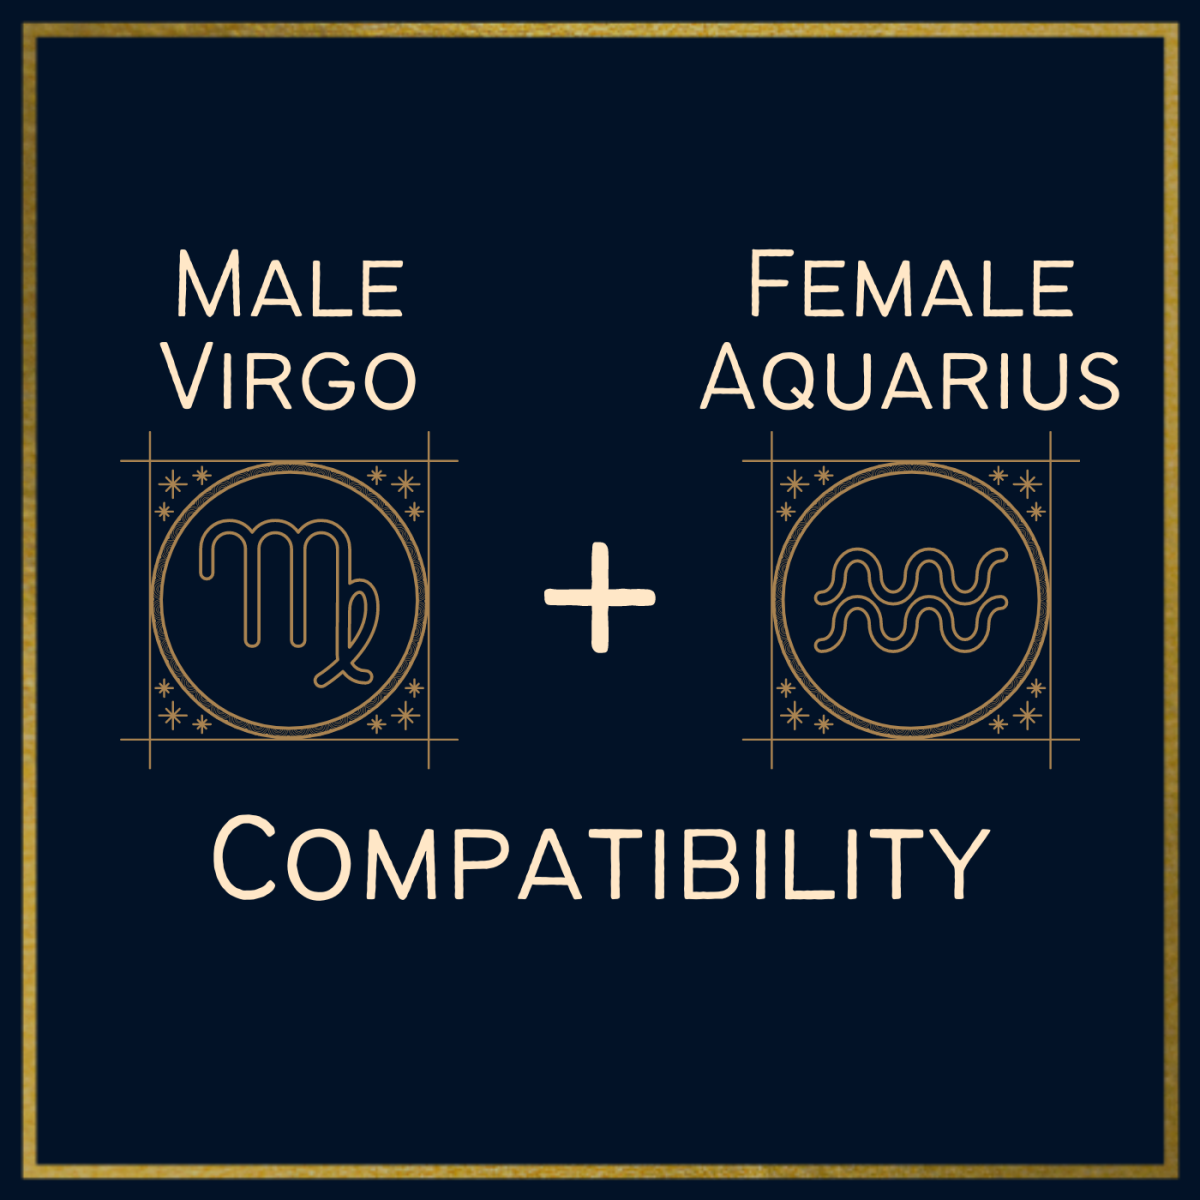 Are an Aquarius woman and a Virgo man compatible? Explore these two signs and their relationship potential.